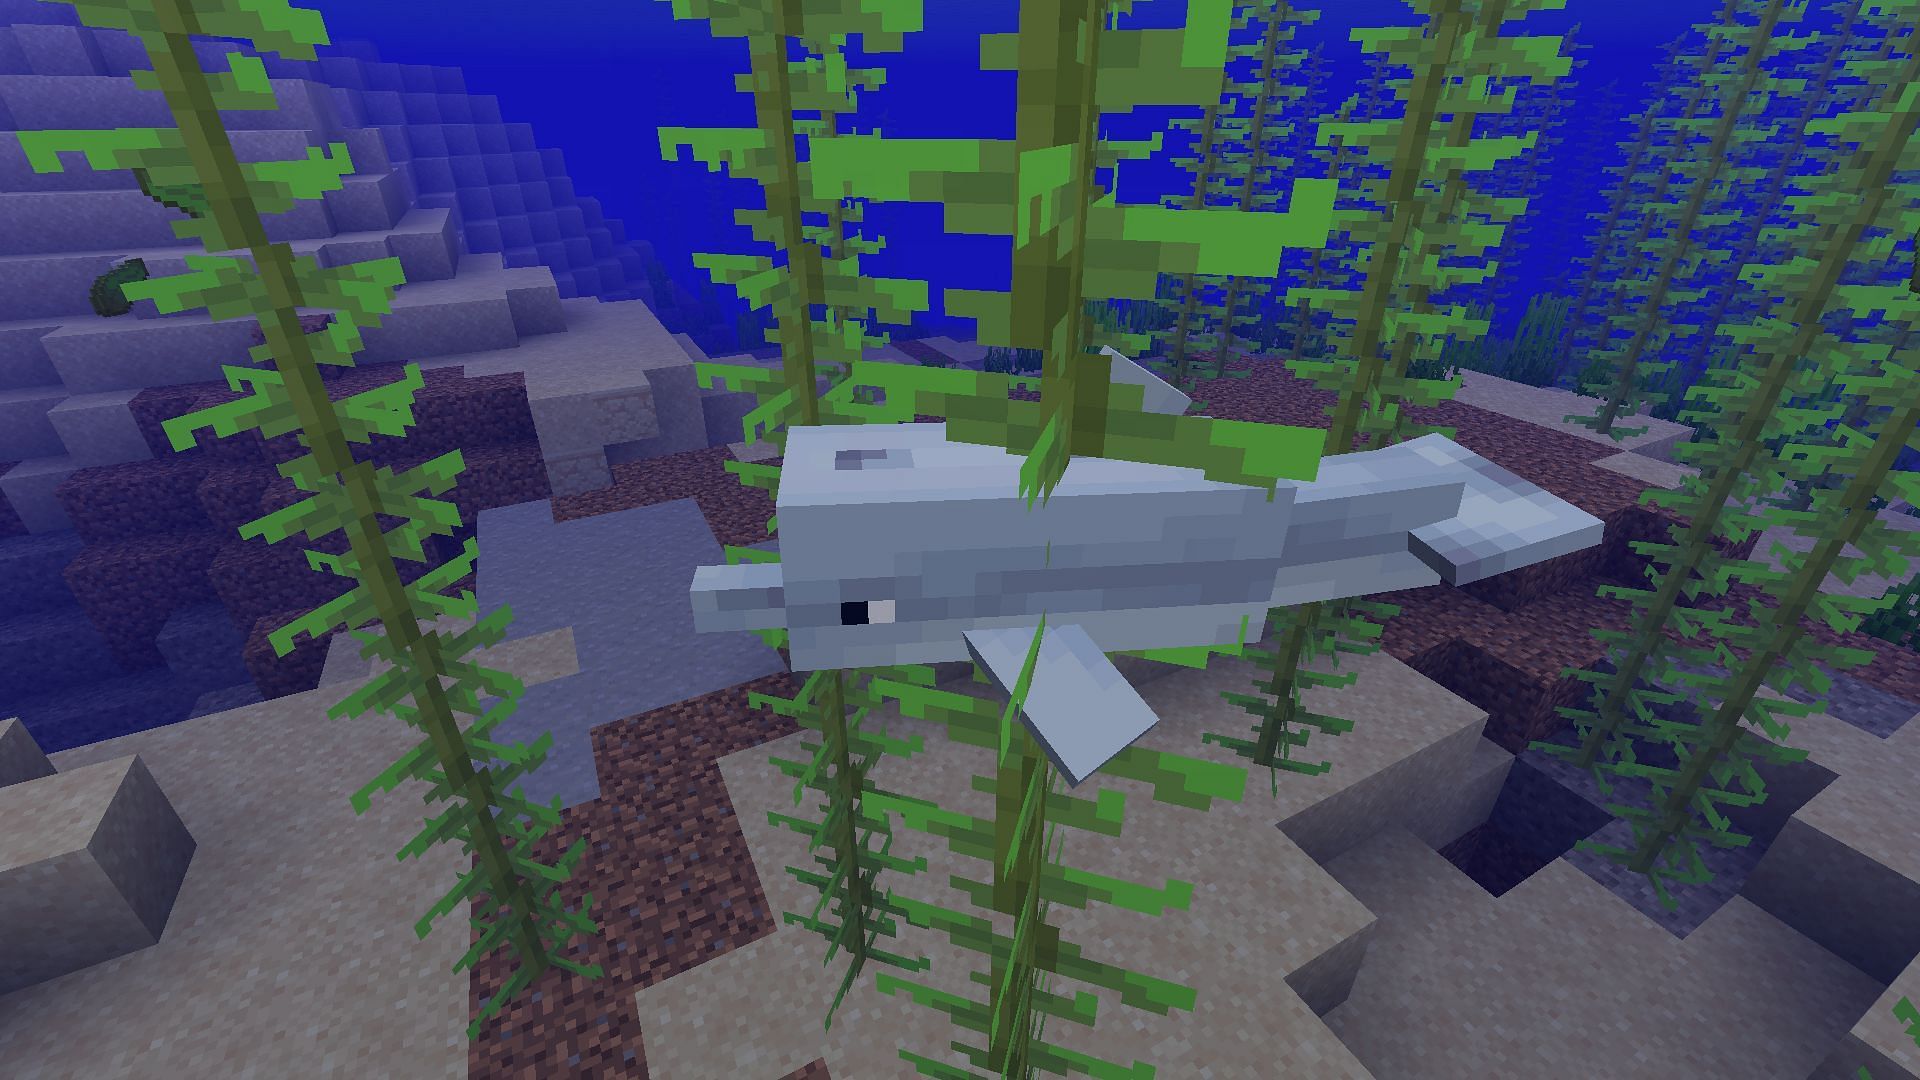 Dolphins are some of the cutest mobs in Minecraft 1.19 (Image via Mojang)